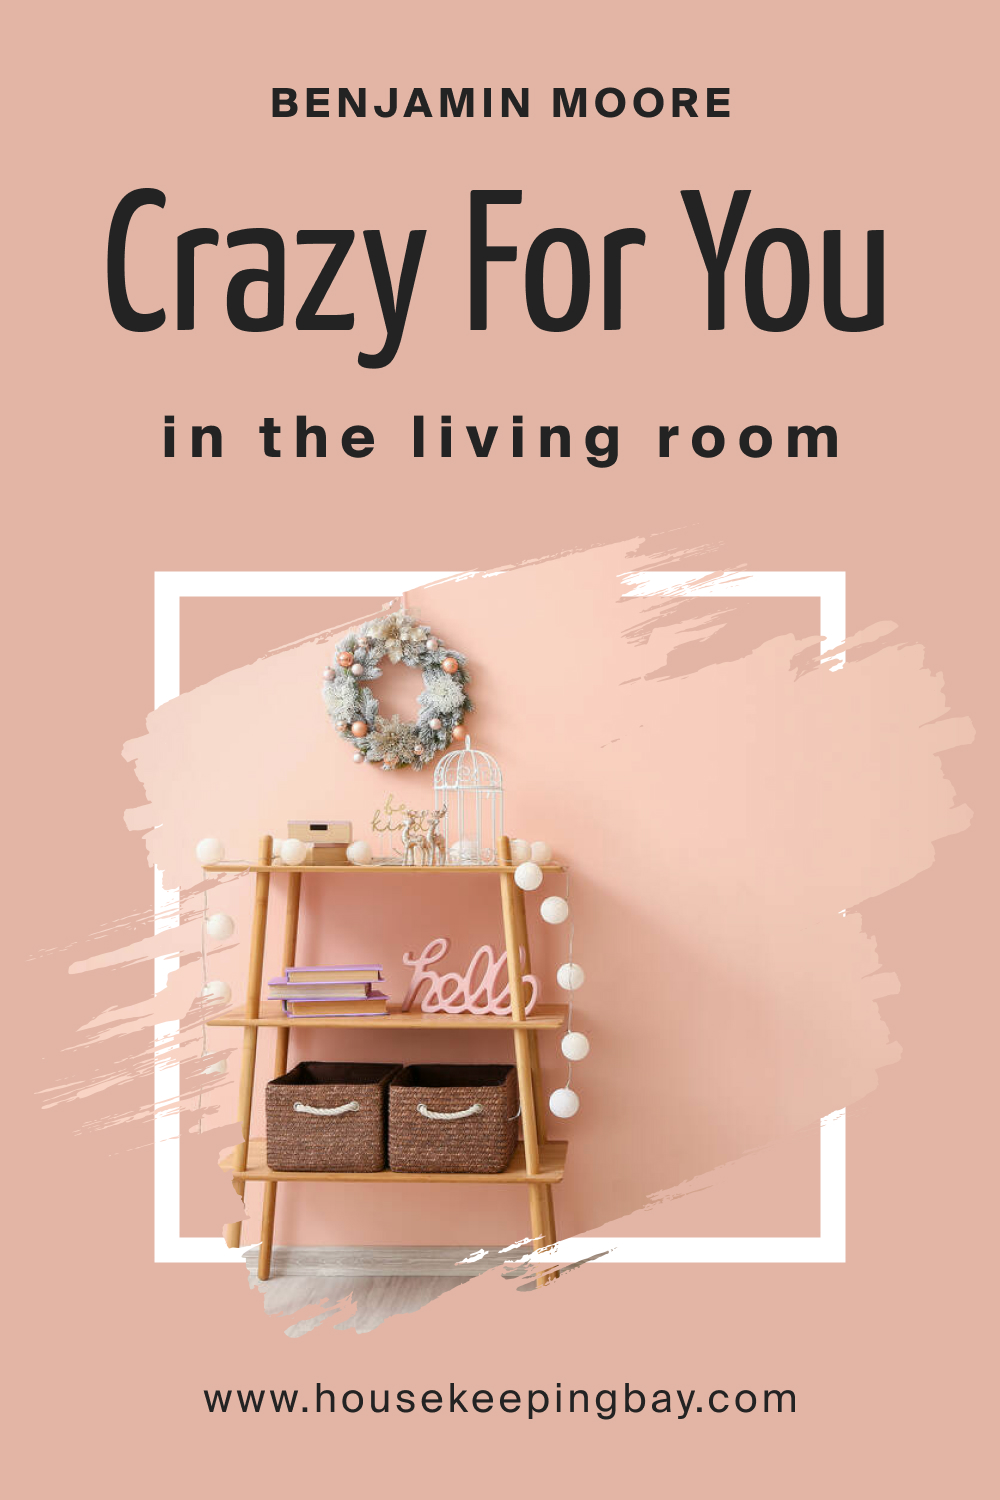 Benjamin Moore. BM Crazy For You 053 in the Living Room